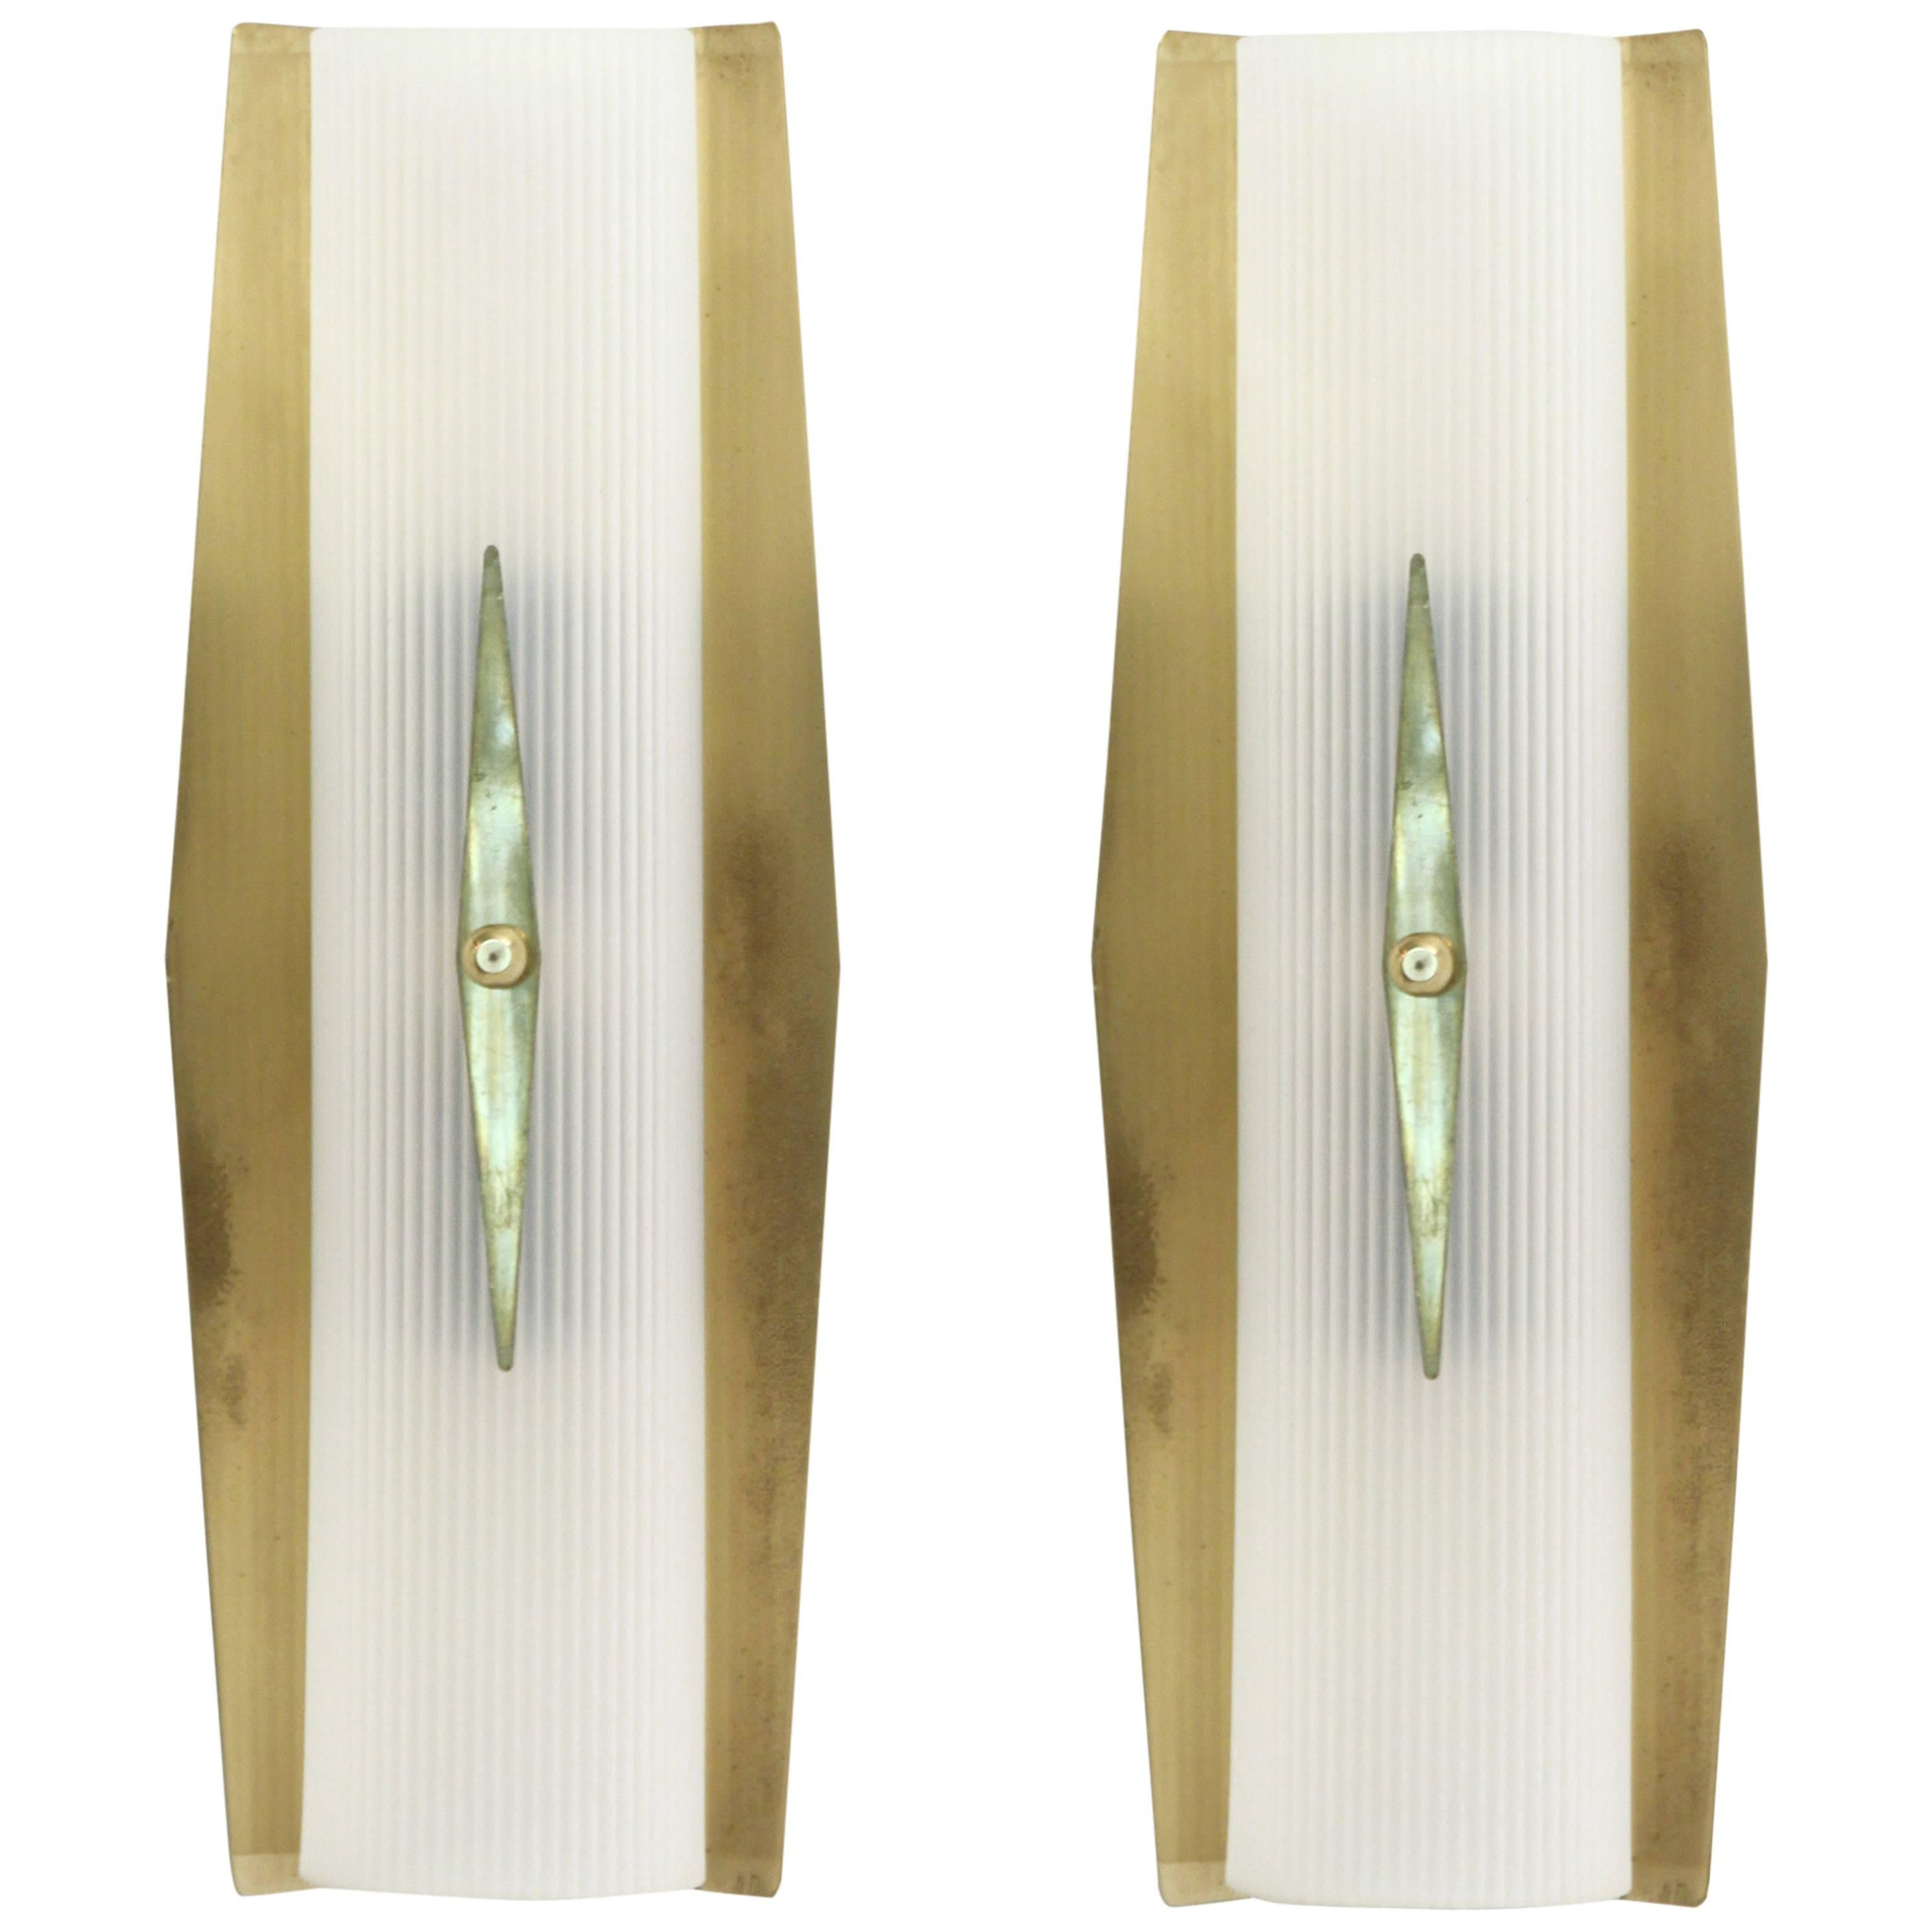 Pair of Functionalist Wall Sconces in Brass by Høvik Lys, 1950s